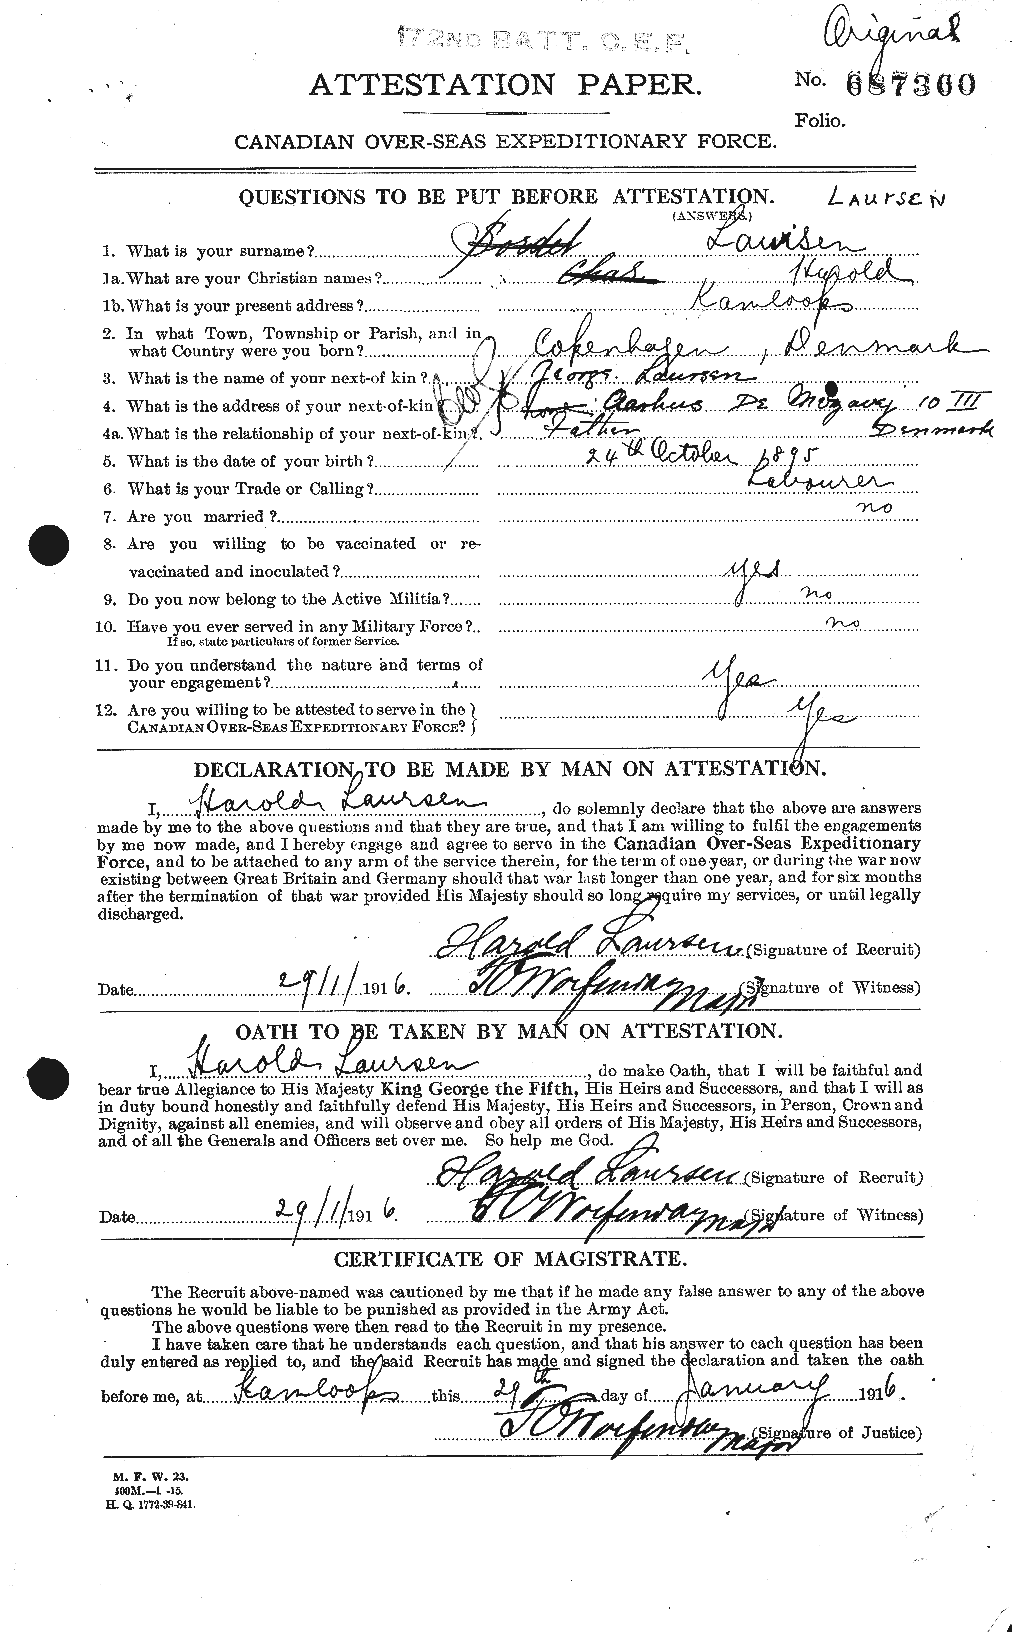 Personnel Records of the First World War - CEF 452998a